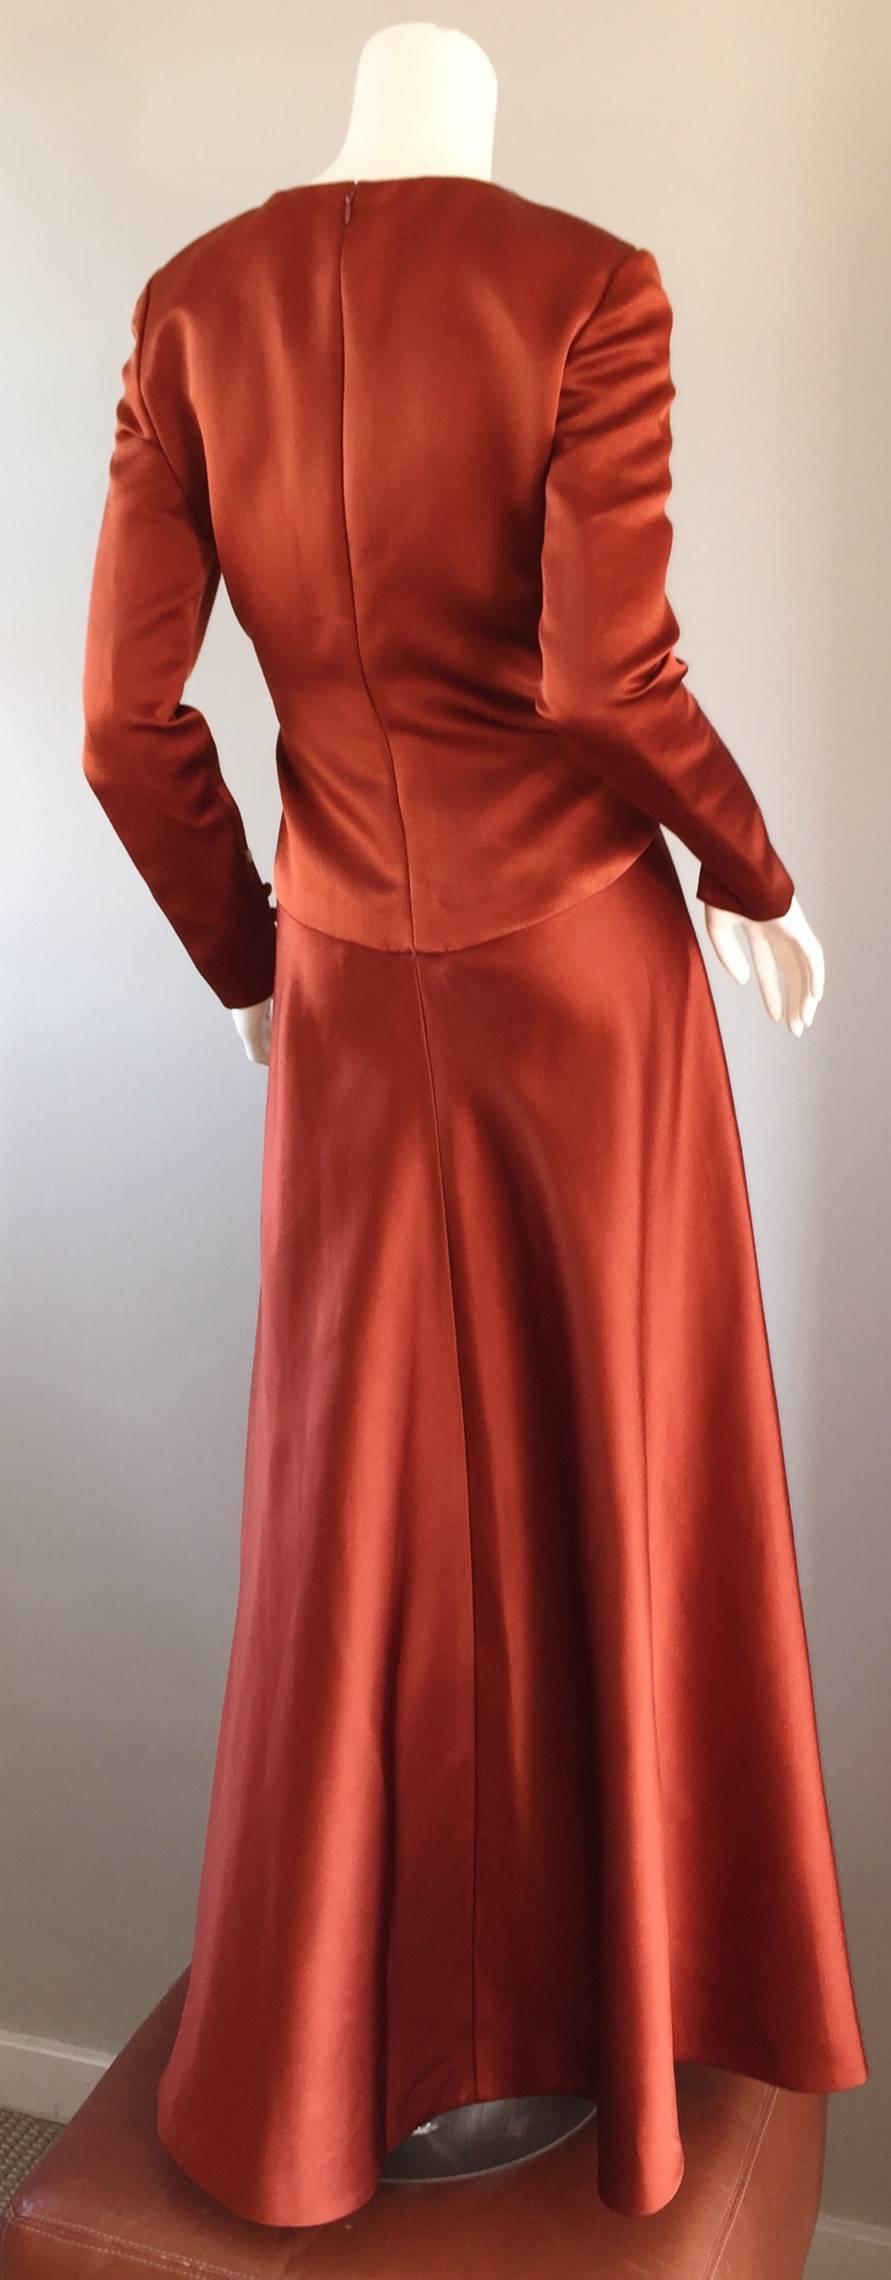 Exceptional vintage BILL BLASS copper colored silk satin evening gown! This dress surely is something else! Tailored long sleeves, with three silk covered buttons at each cuff. Full skirt, that looks amazing on! Slimming seams, with heavy attention